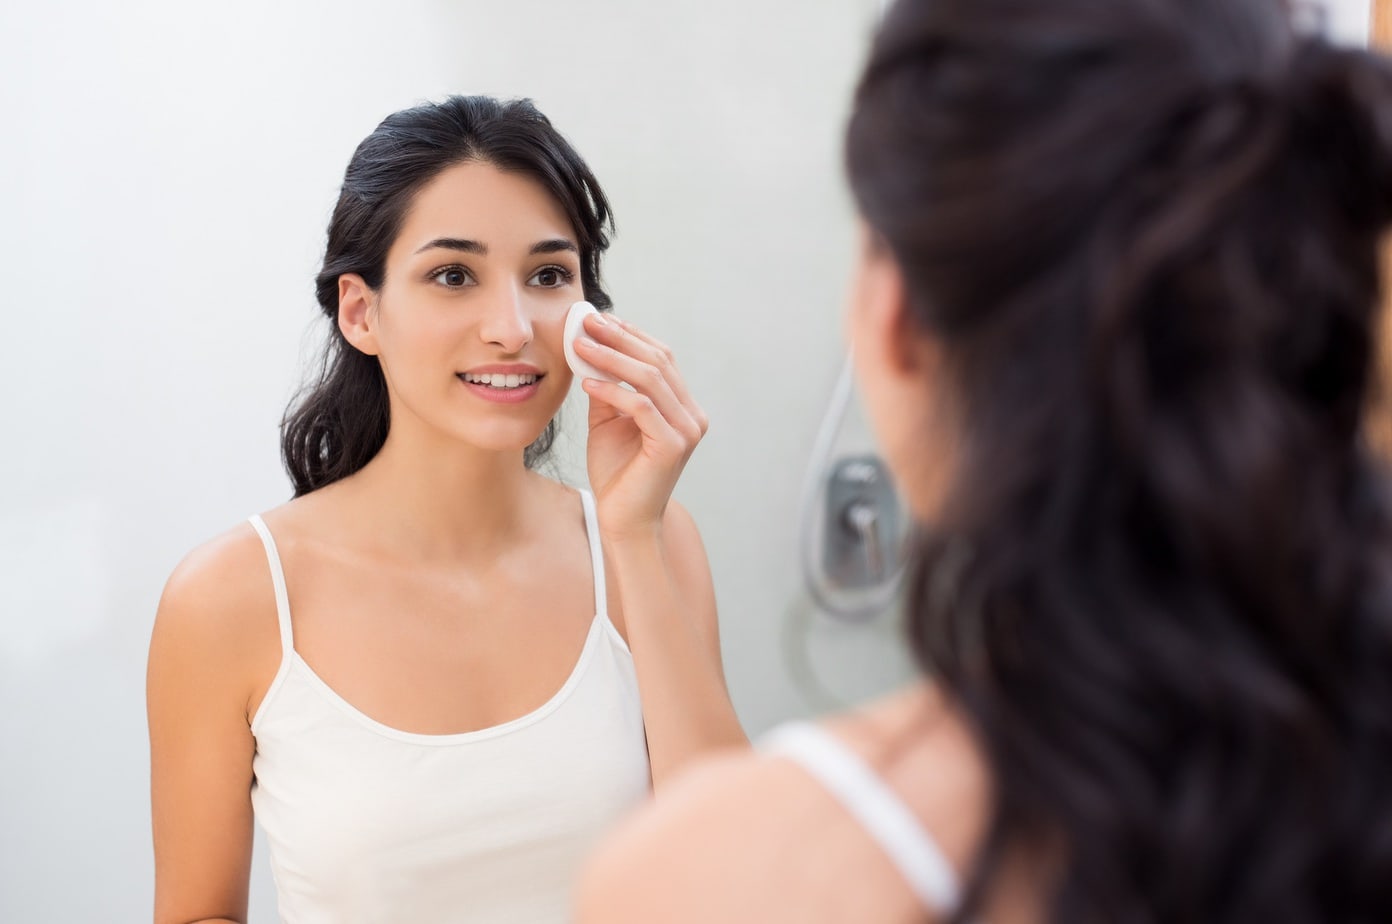 Washing your face with powder. 5 reasons to try this trick